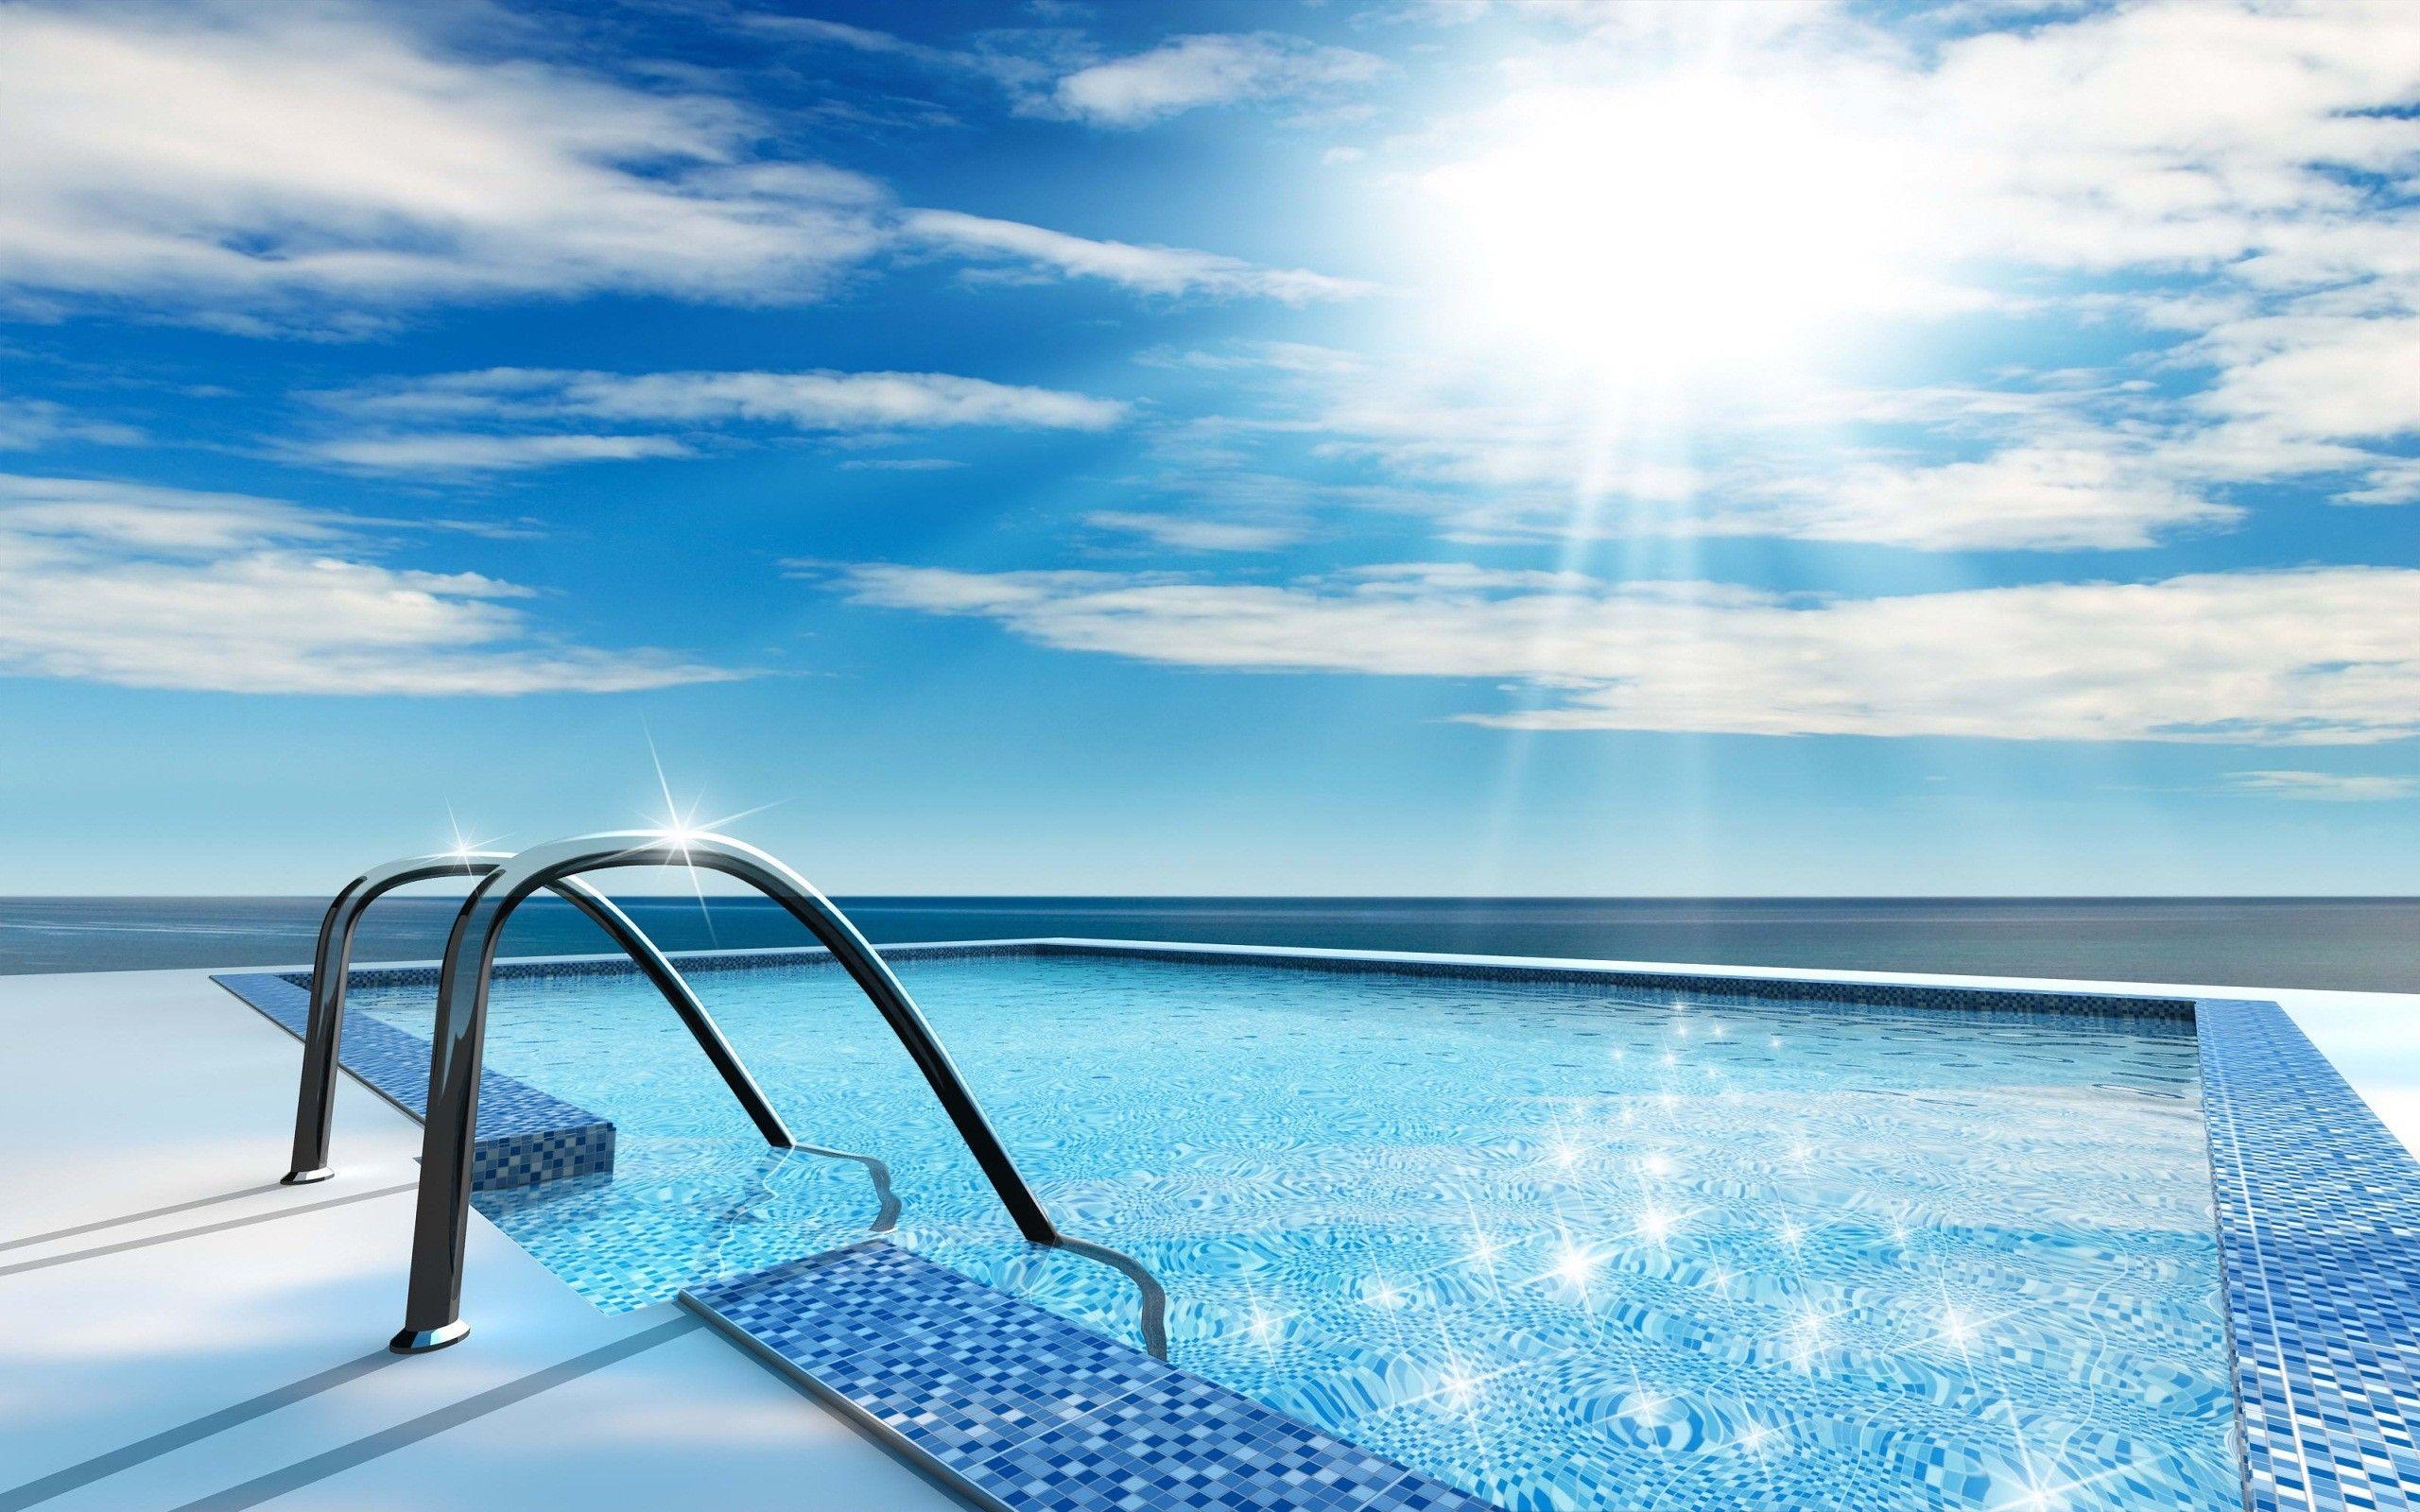 Swimming Pool Photos Download The BEST Free Swimming Pool Stock Photos   HD Images